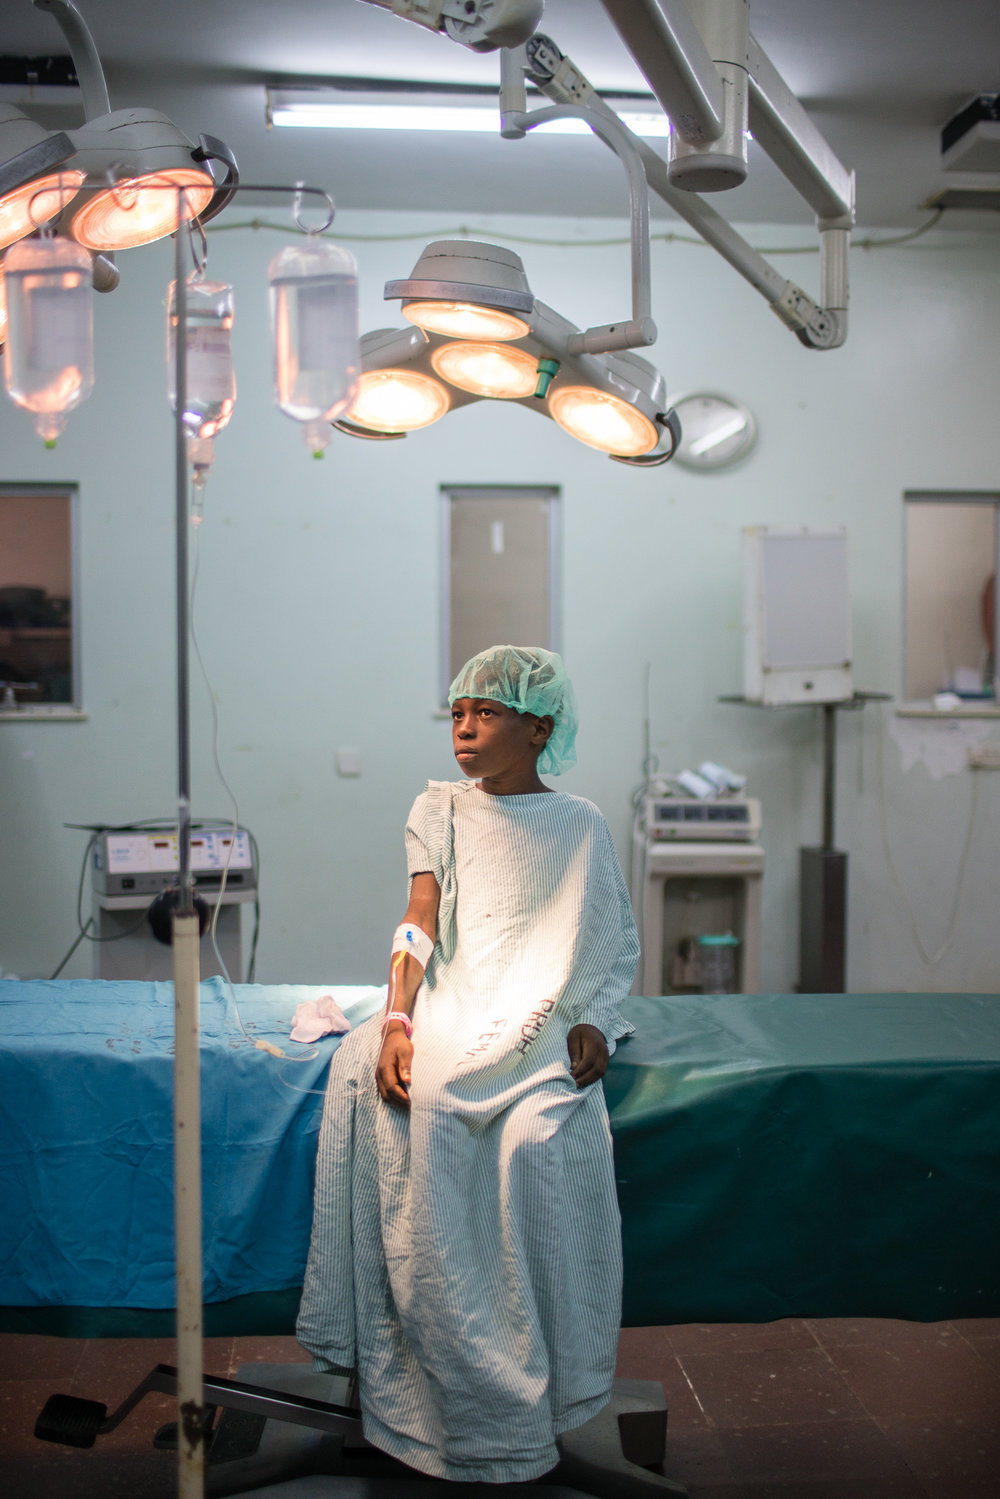 A young boy with old burn wounds wating for surgery that will change his life in Mombassa, Kenya